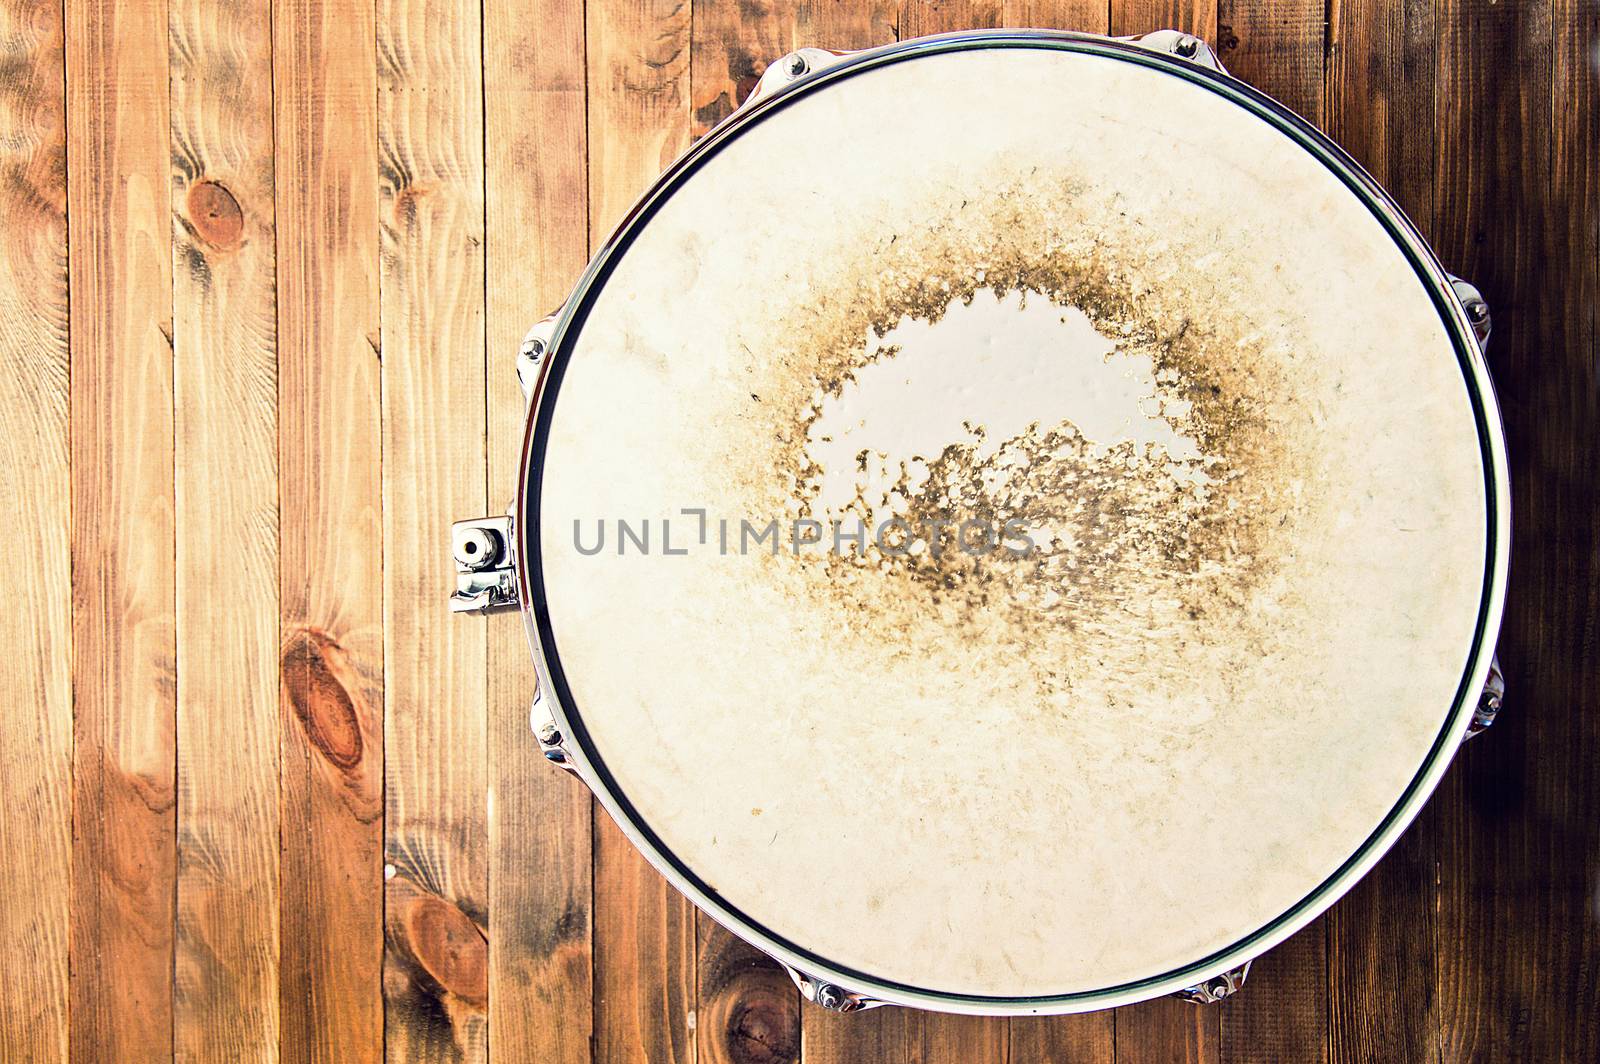 Drums conceptual image. Picture of snare drum lying on wooden background. Retro vintage instagram picture.